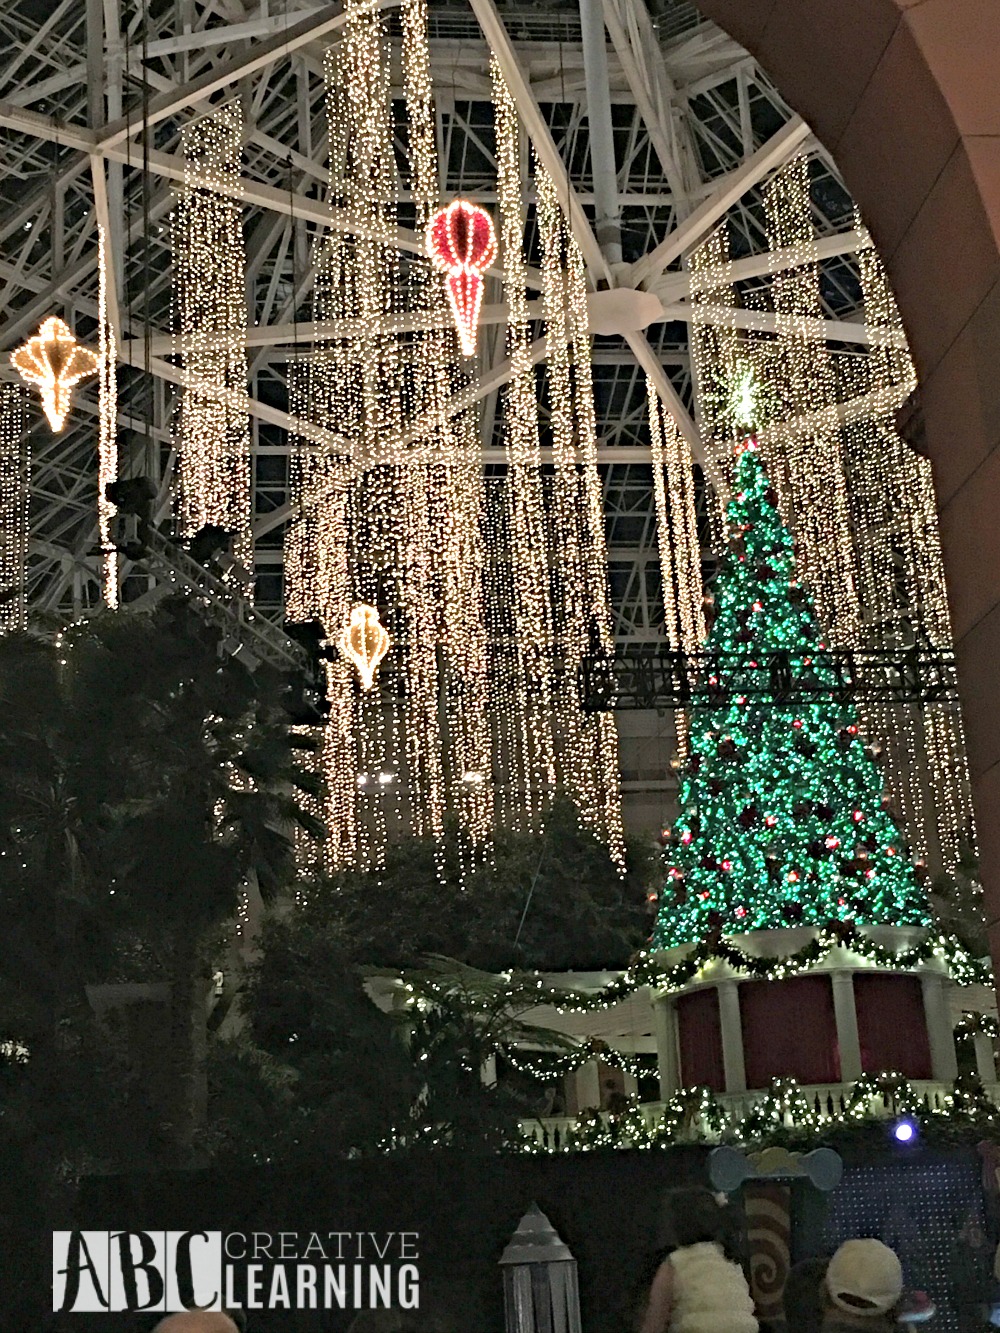 7 Reasons to Visit Gaylord Palms and ICE During Christmas Tree Lighting